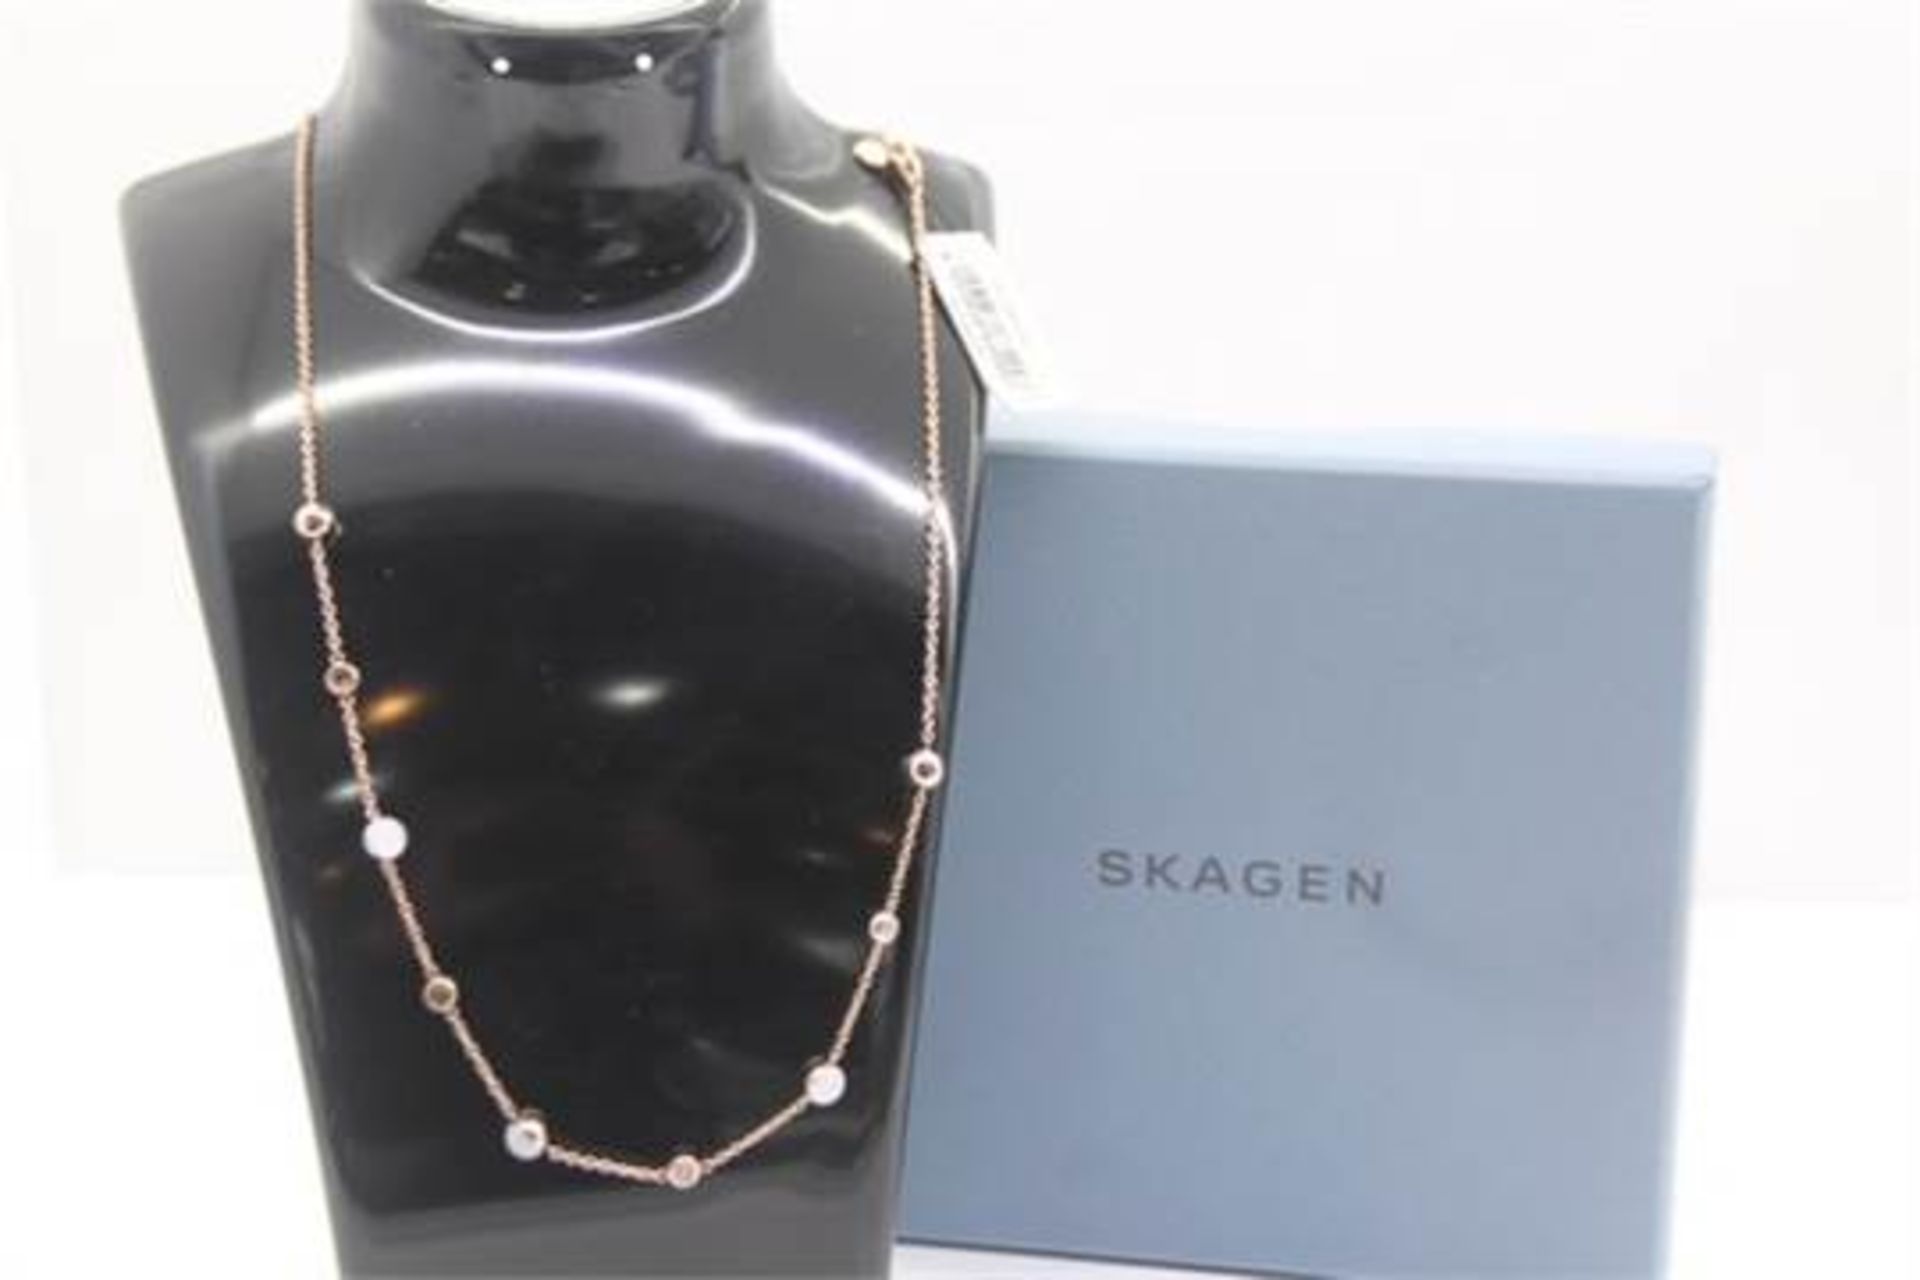 BOXED BRAND NEW SKAGEN DENMARK LADIES NECKLACE RRP £100 (ADC-9100426)(10.04.17)